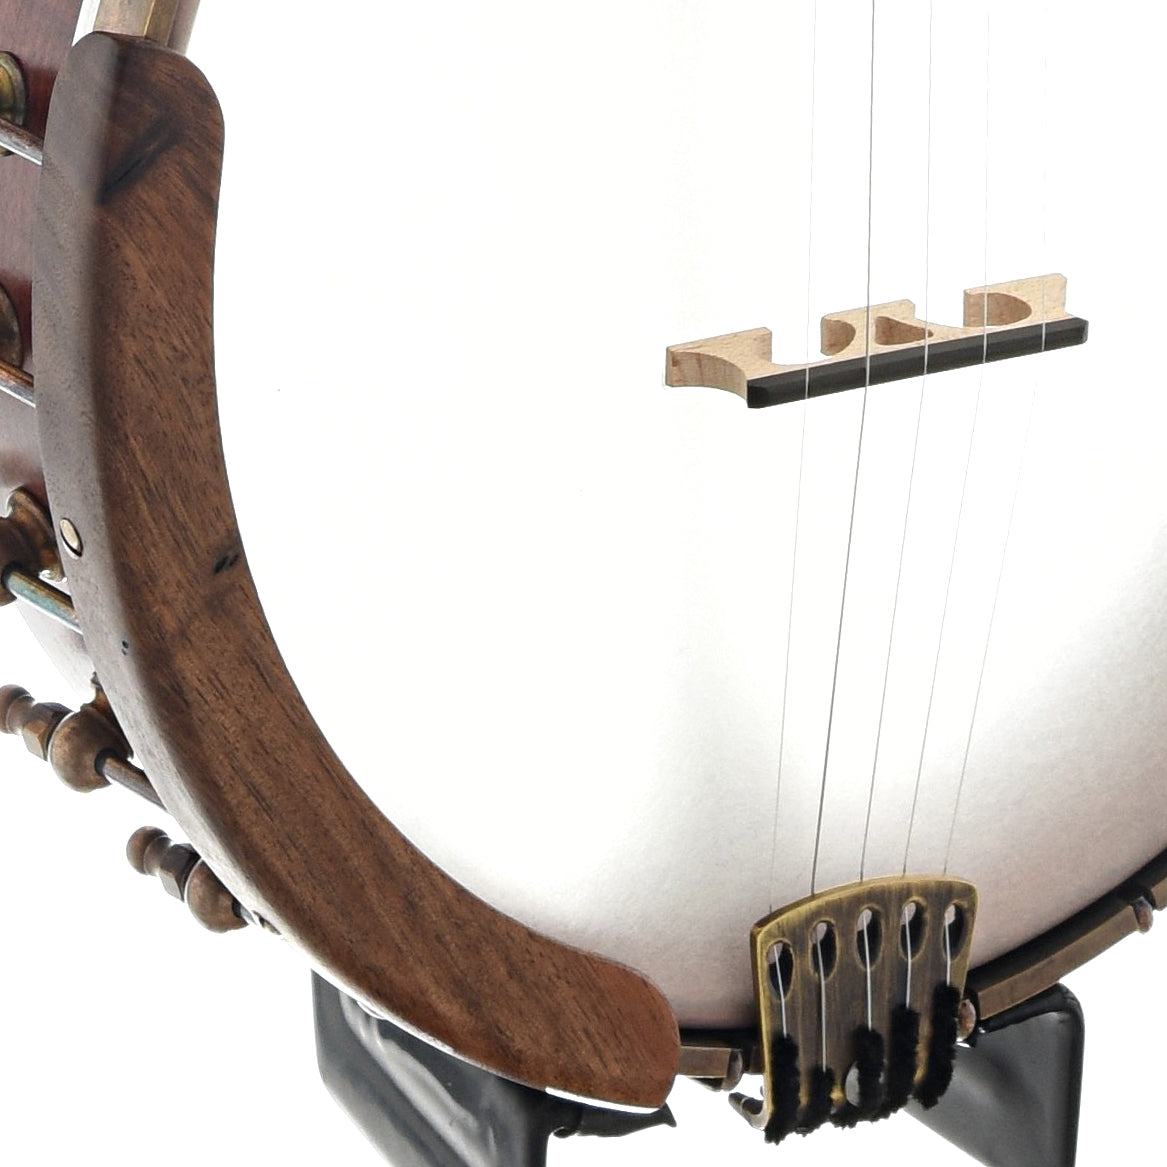 Image 3 of Ome Wizard 11" Openback Banjo & Case, Curly Maple - SKU# WIZARD-CMPL11 : Product Type Open Back Banjos : Elderly Instruments